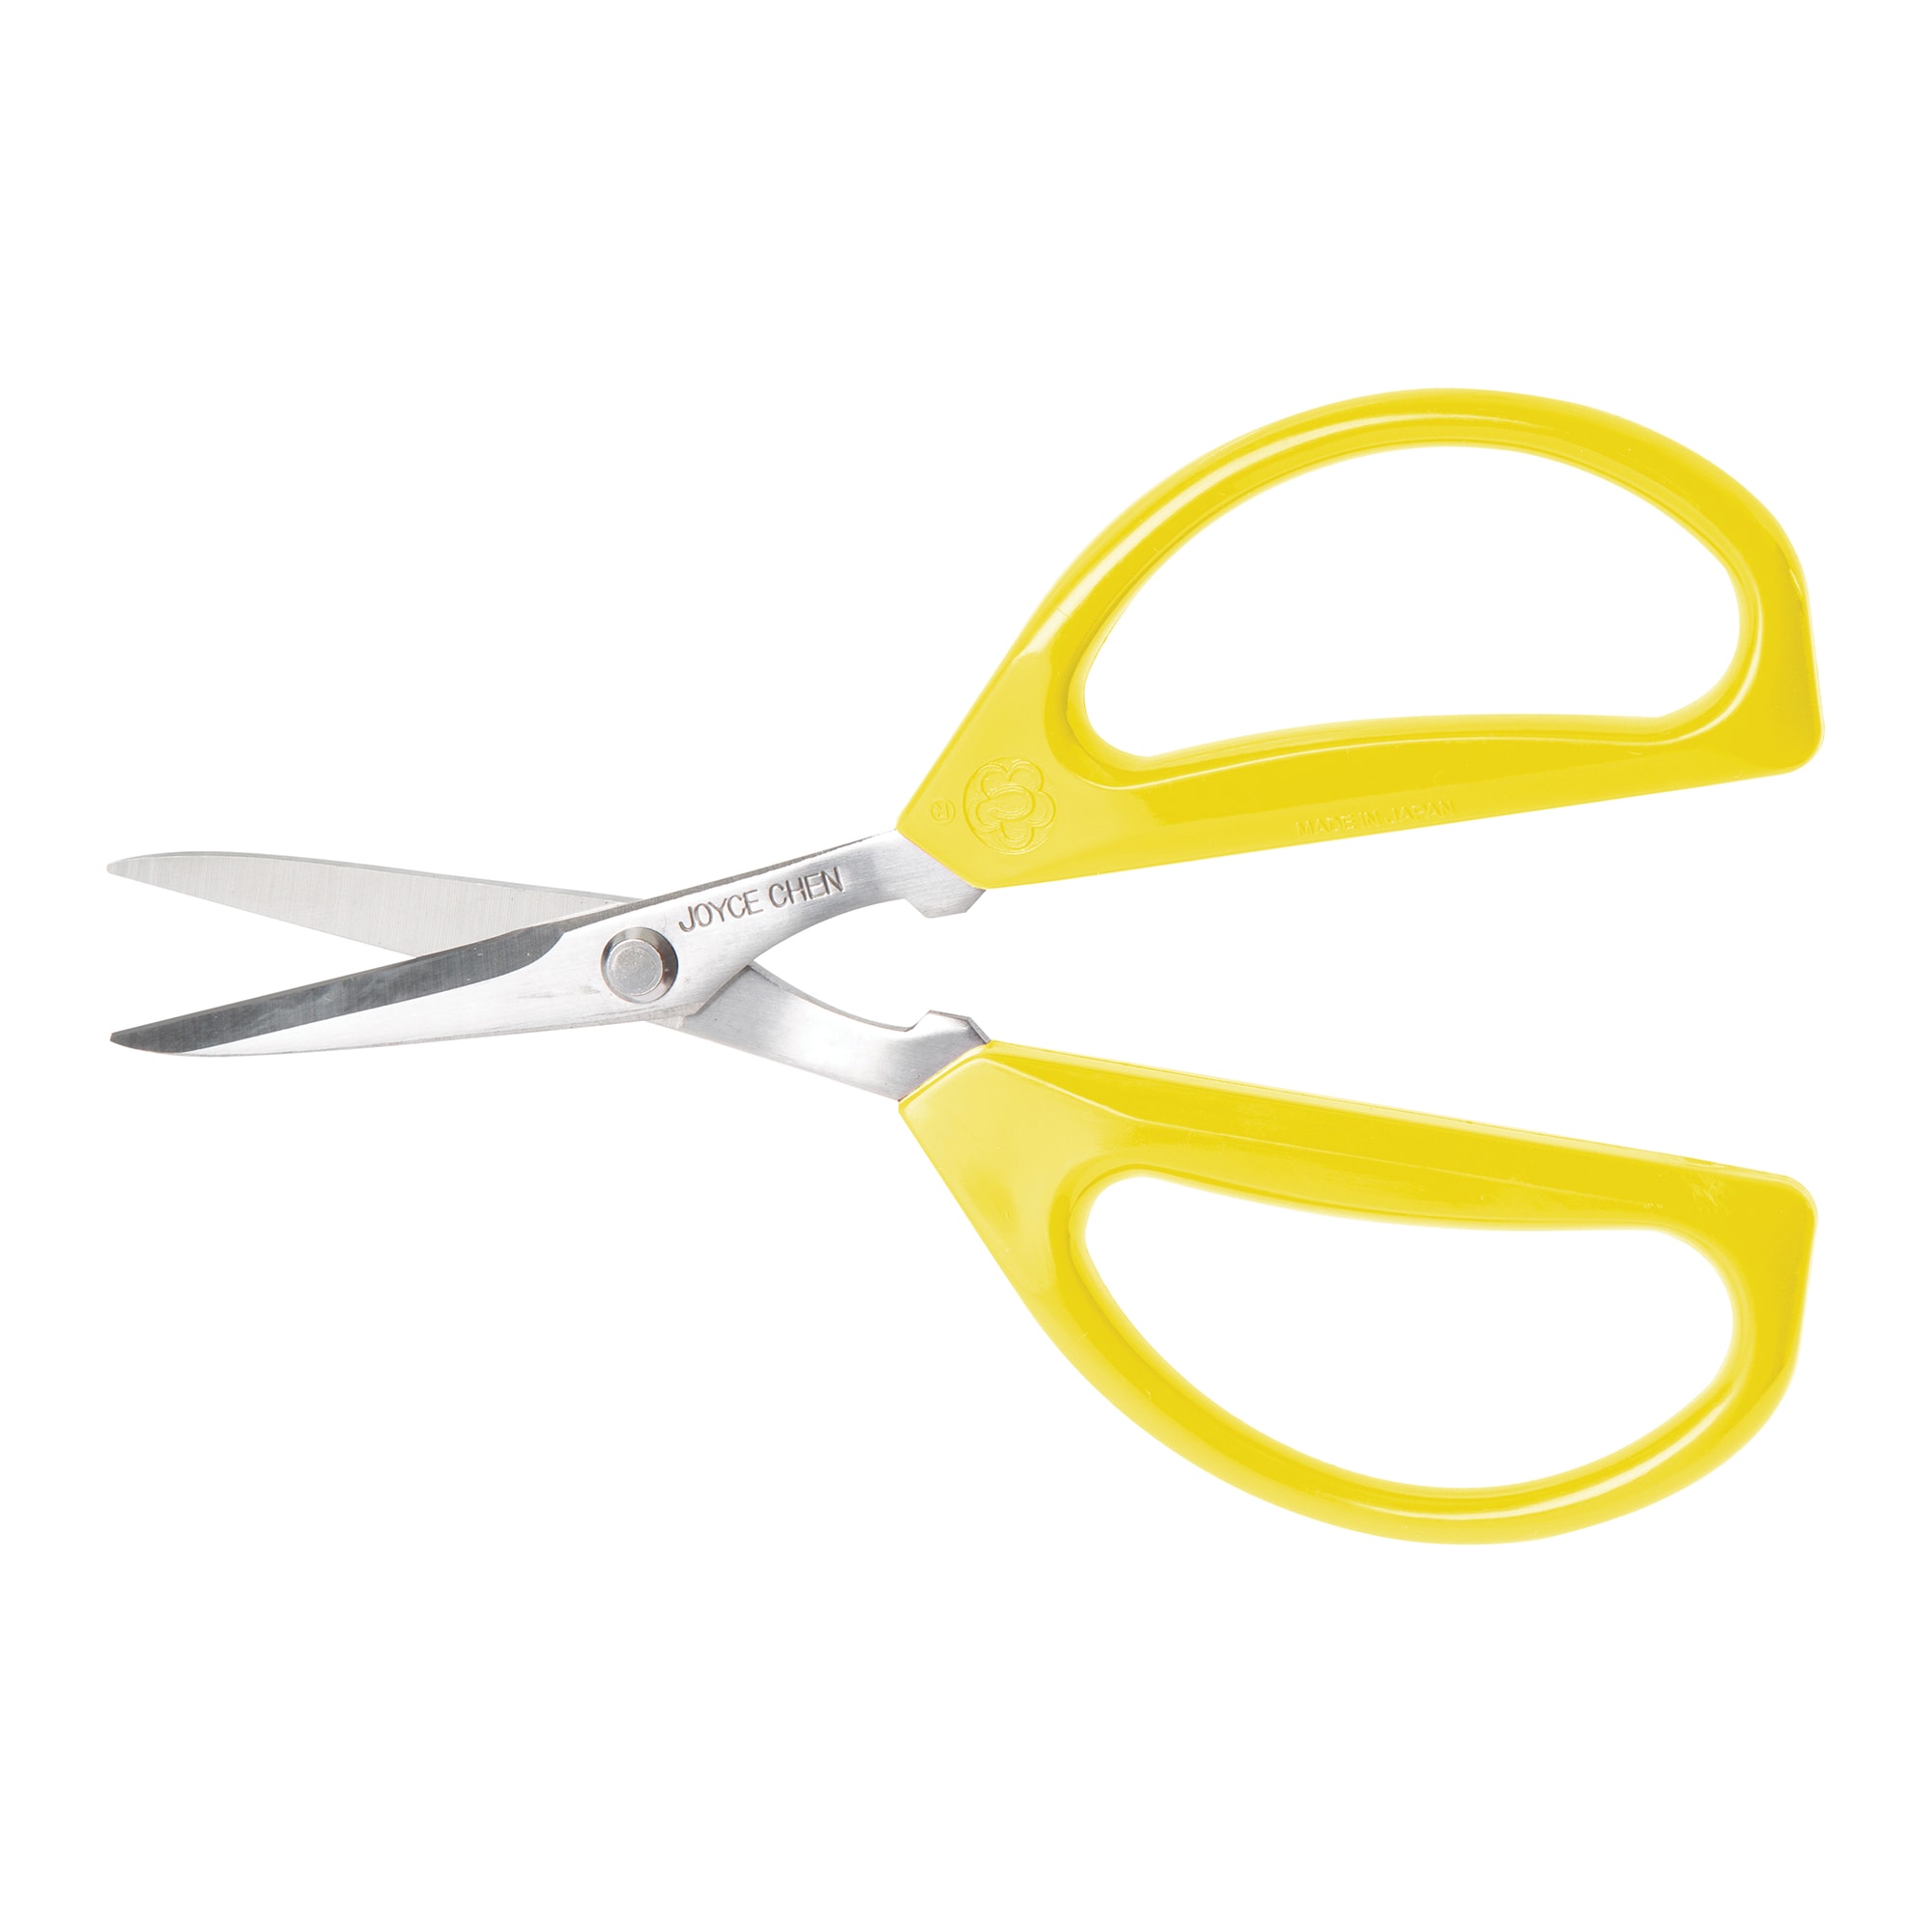 Olfa LTD-10 Strong Stainless Steel Scissors, Sharp and Durable